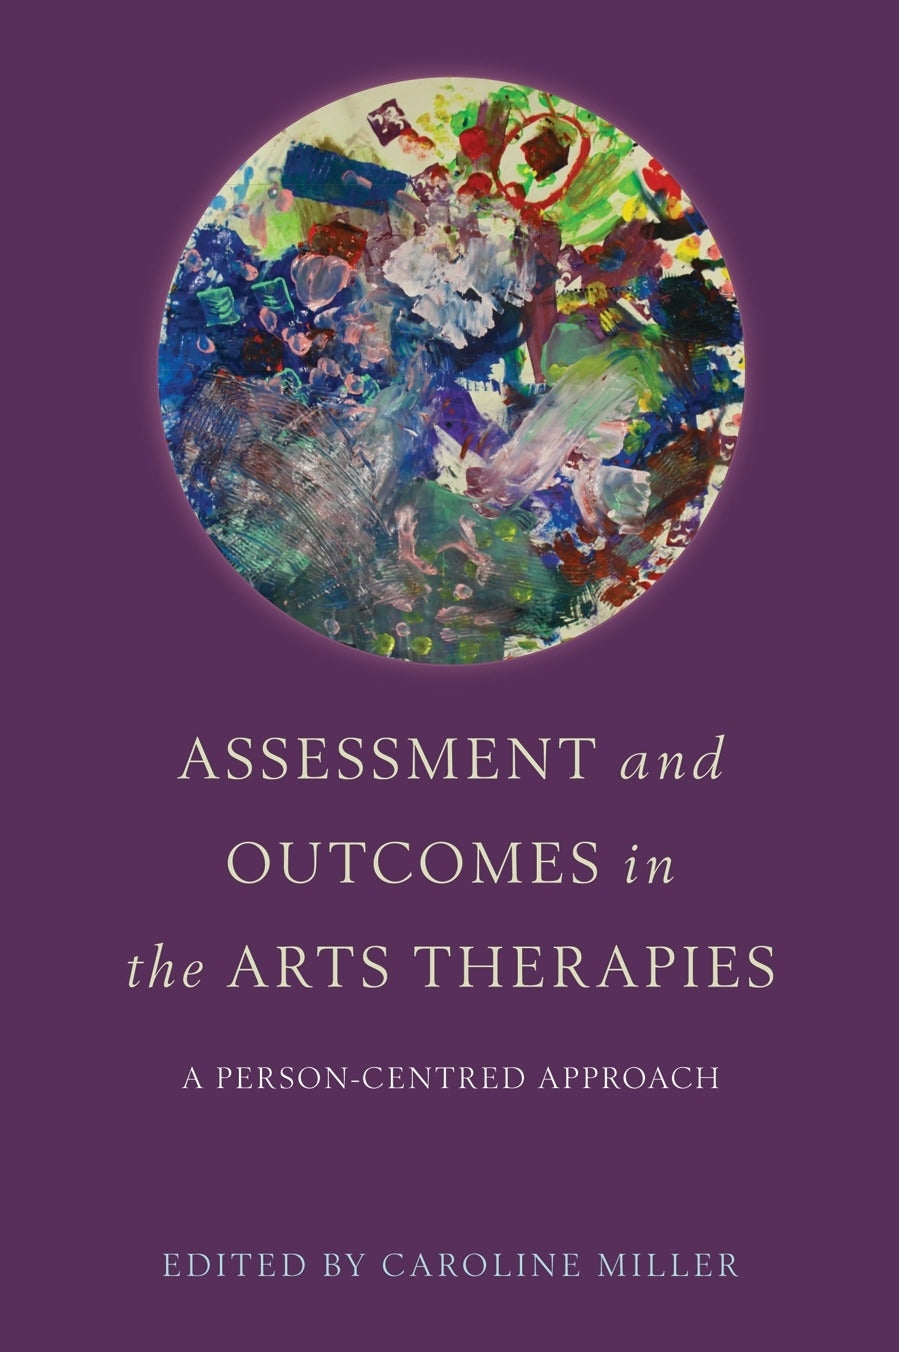 Assessment and Outcomes in the Arts Therapies by Caroline Miller, No Author Listed